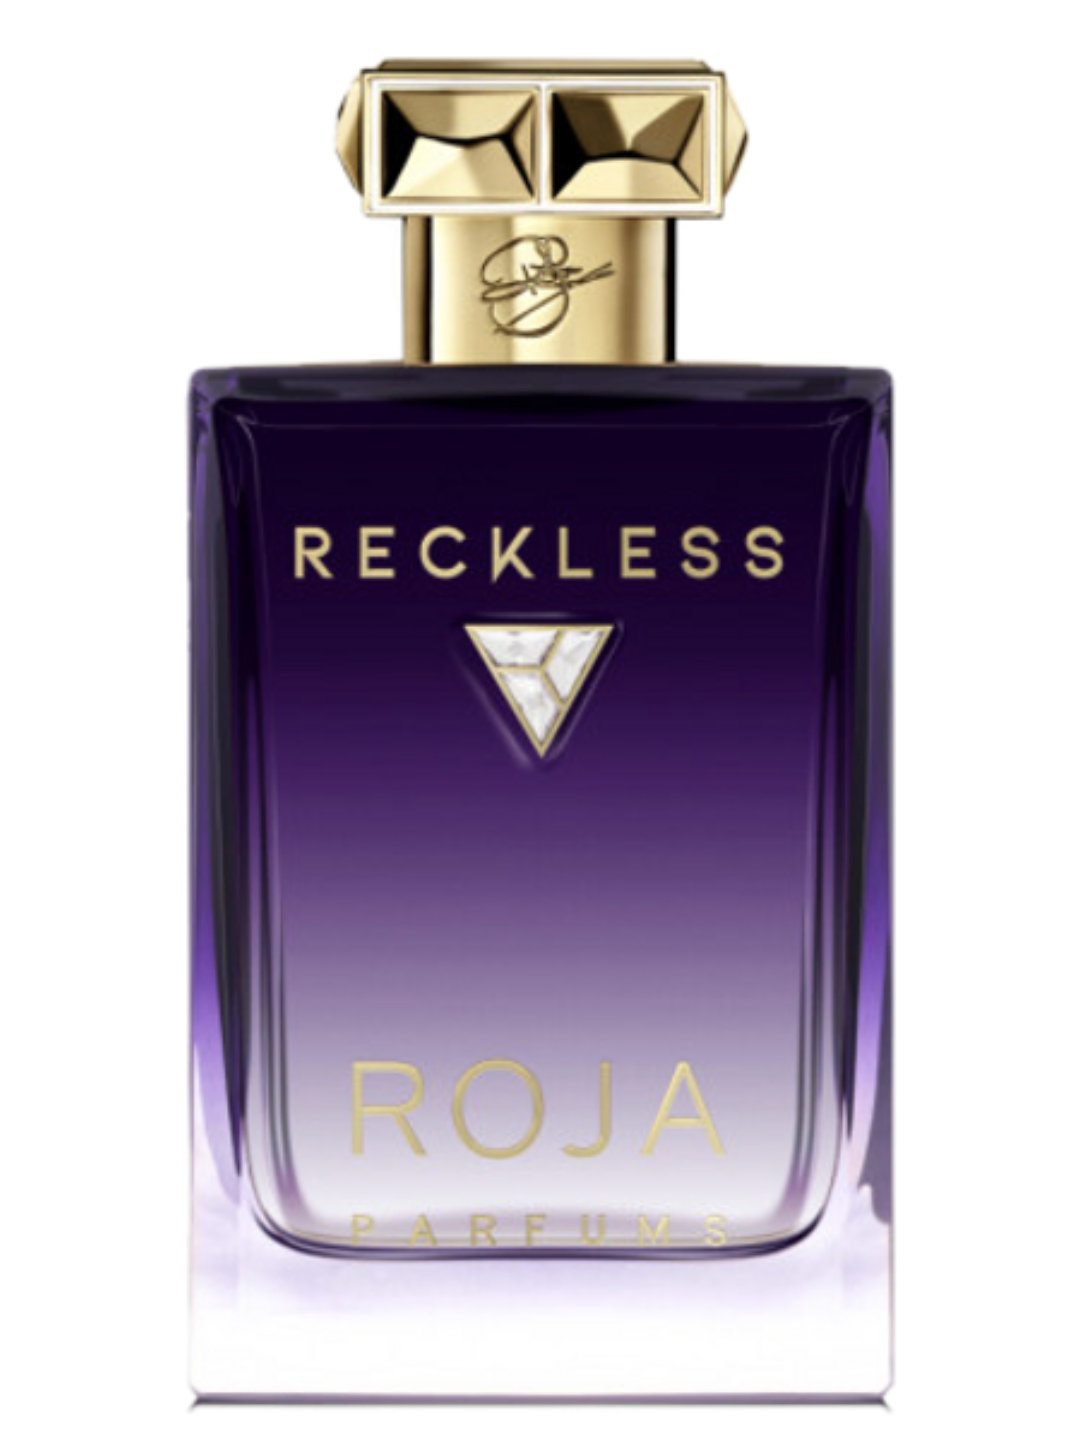 Reckless pour Femme Essence by Roja